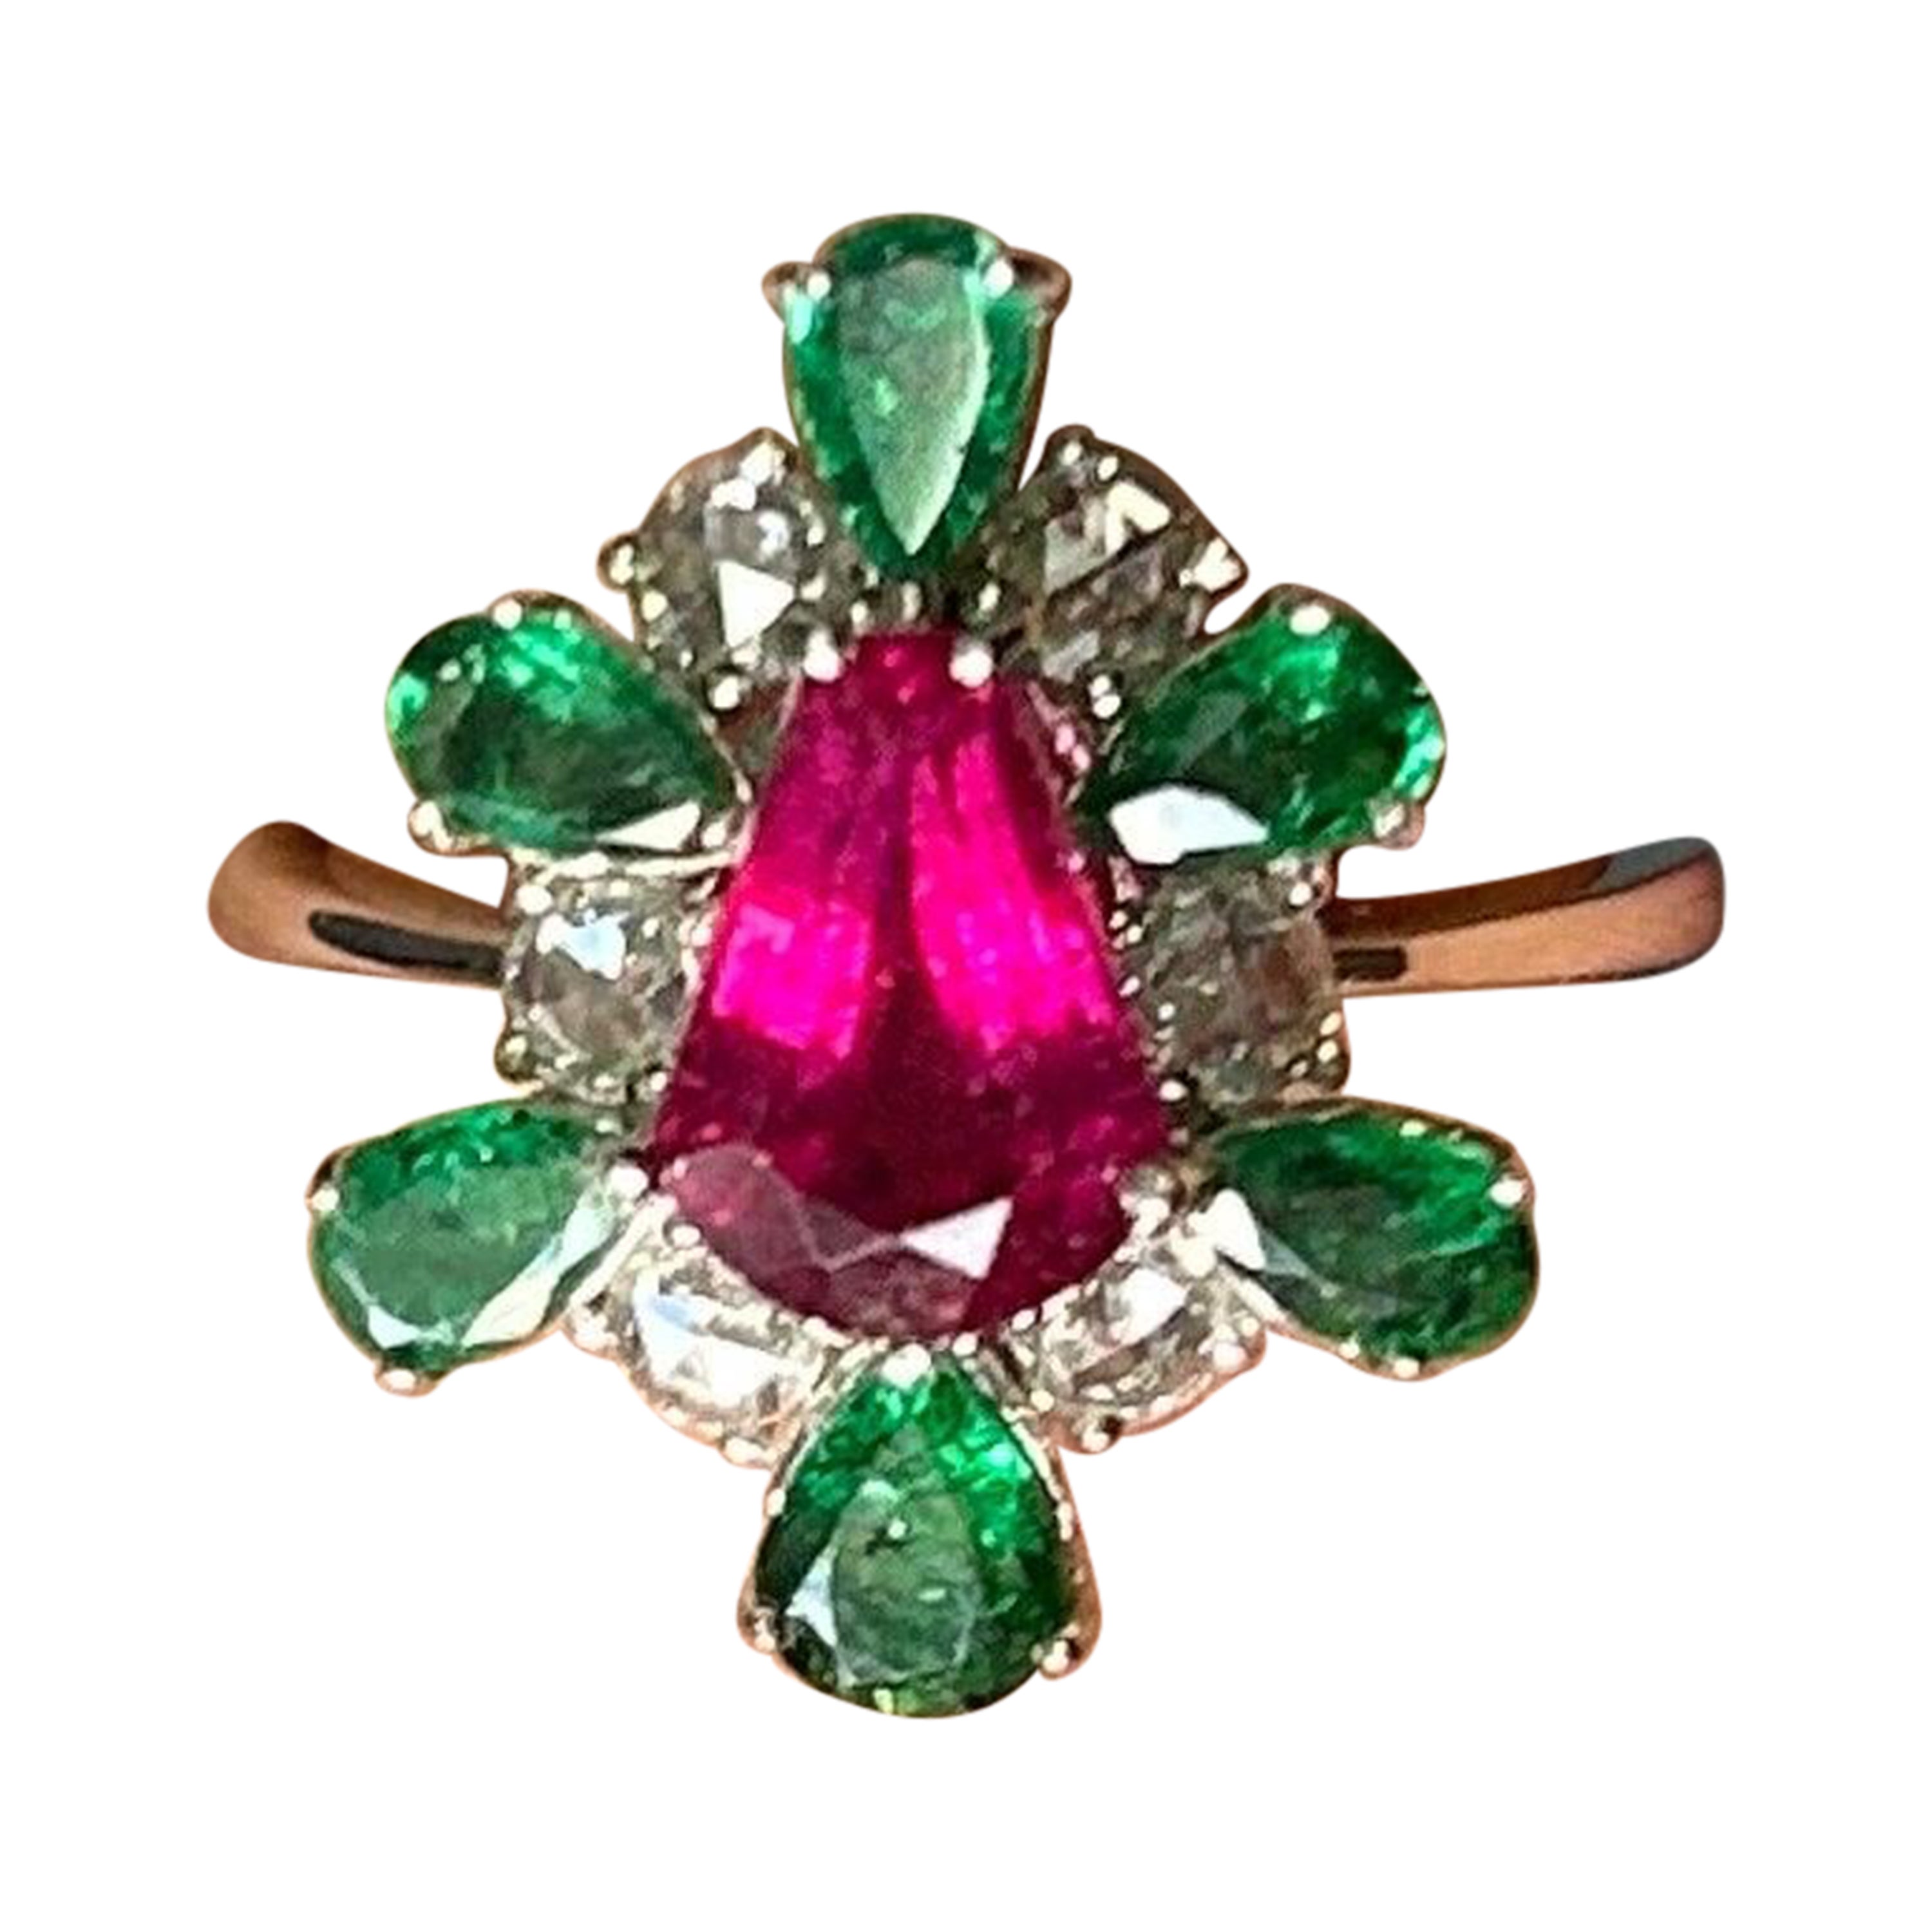 Certified 1.43 Carat Mozambique Ruby and Emerald Cocktail Engagement Ring For Sale